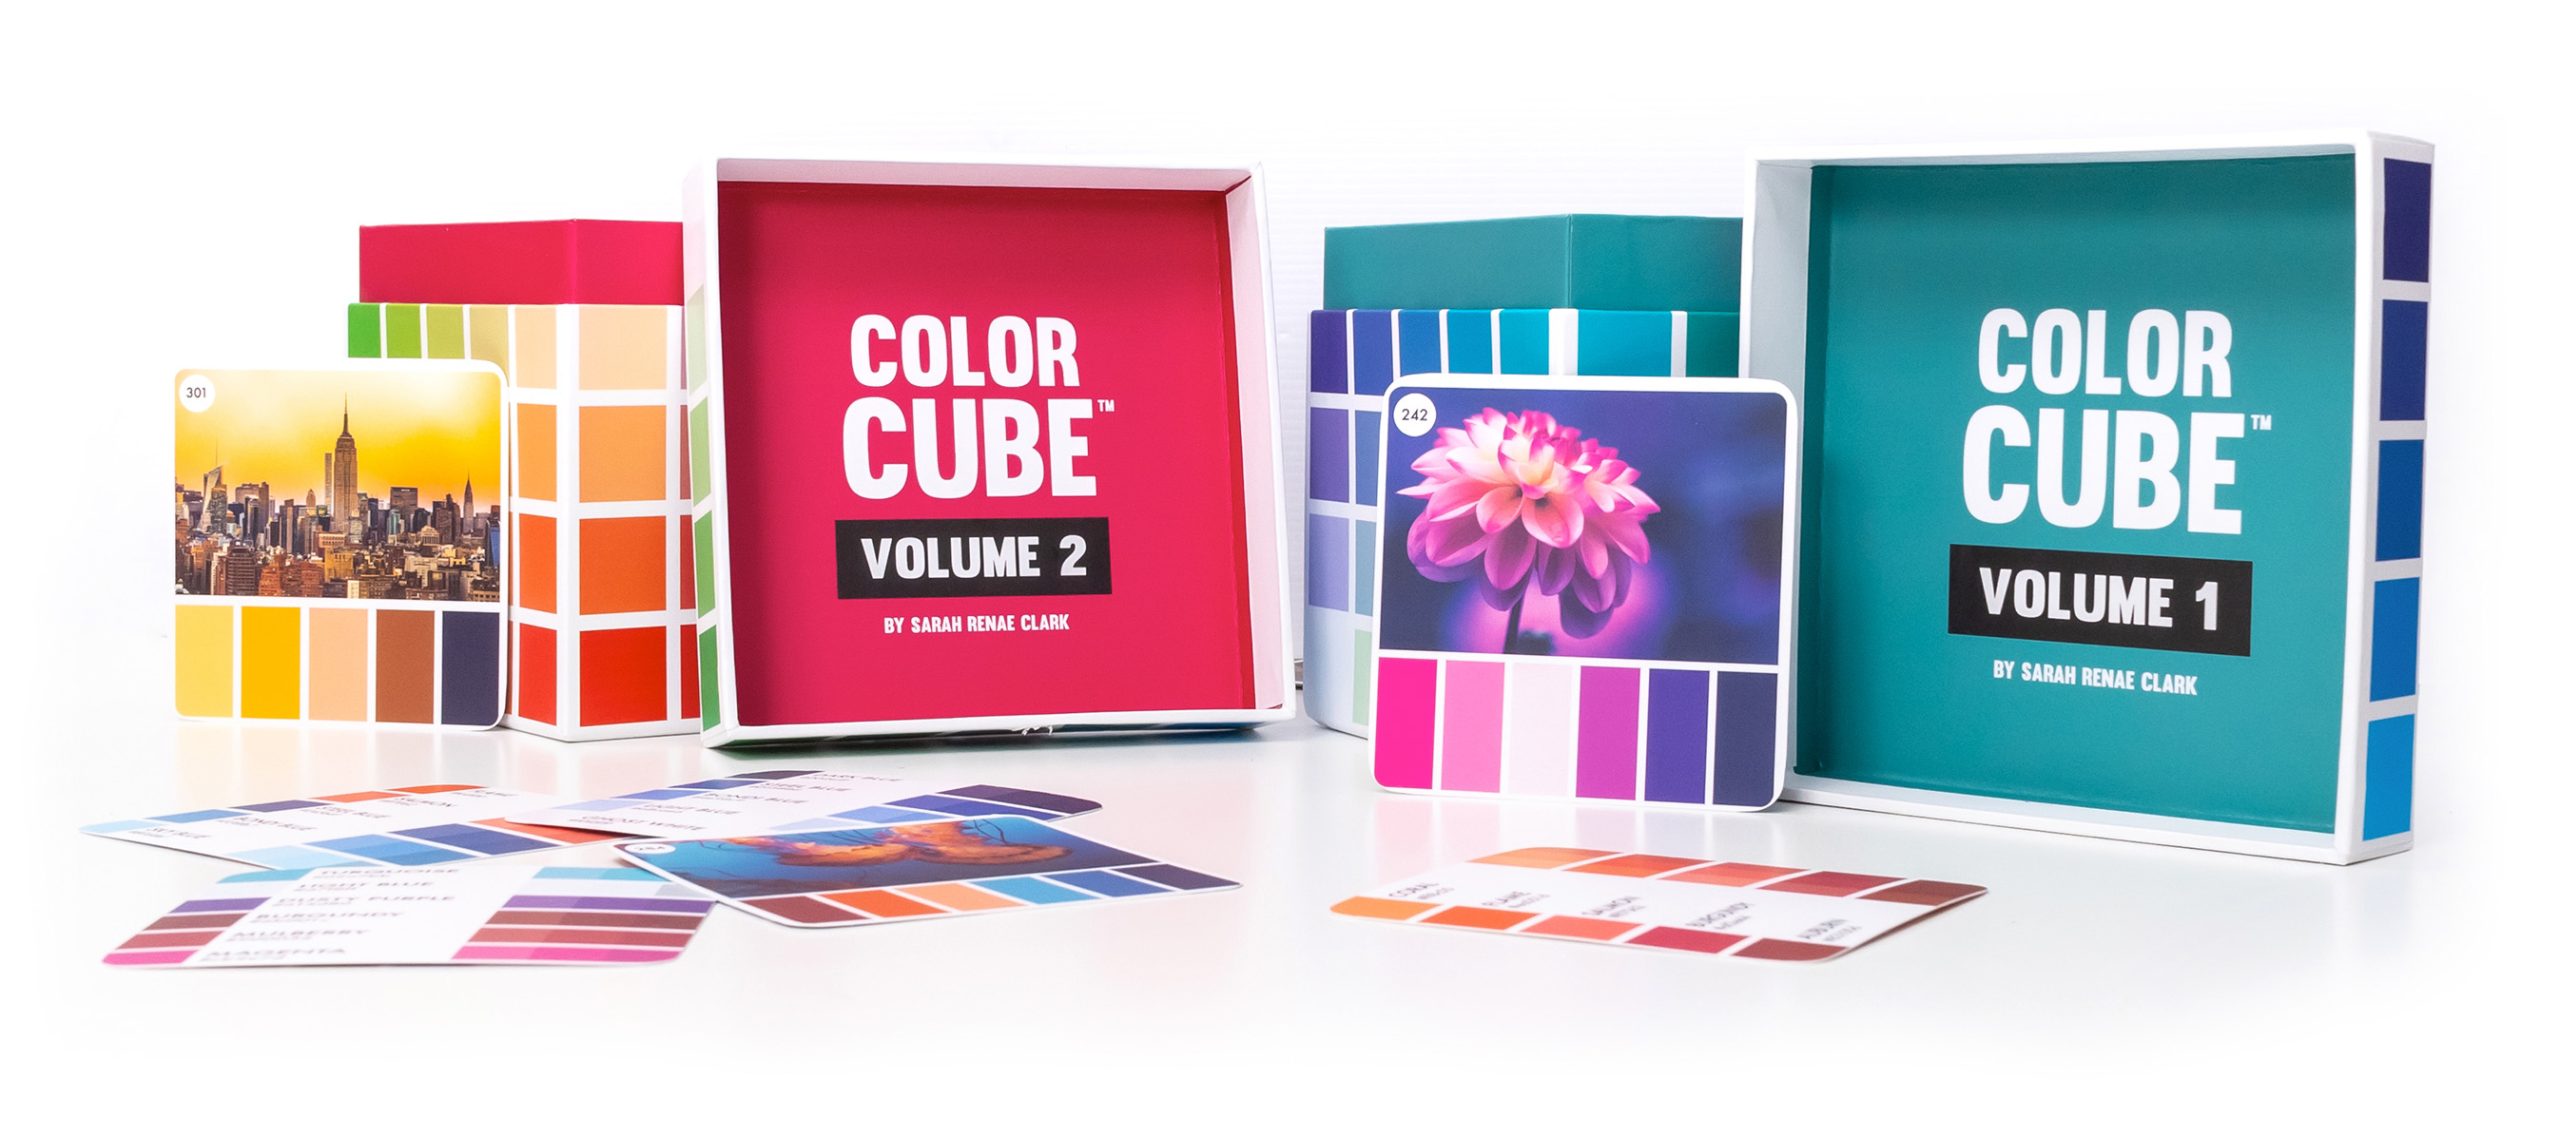 Let's use a color palette from the Sarah Renae Clark Color Cube